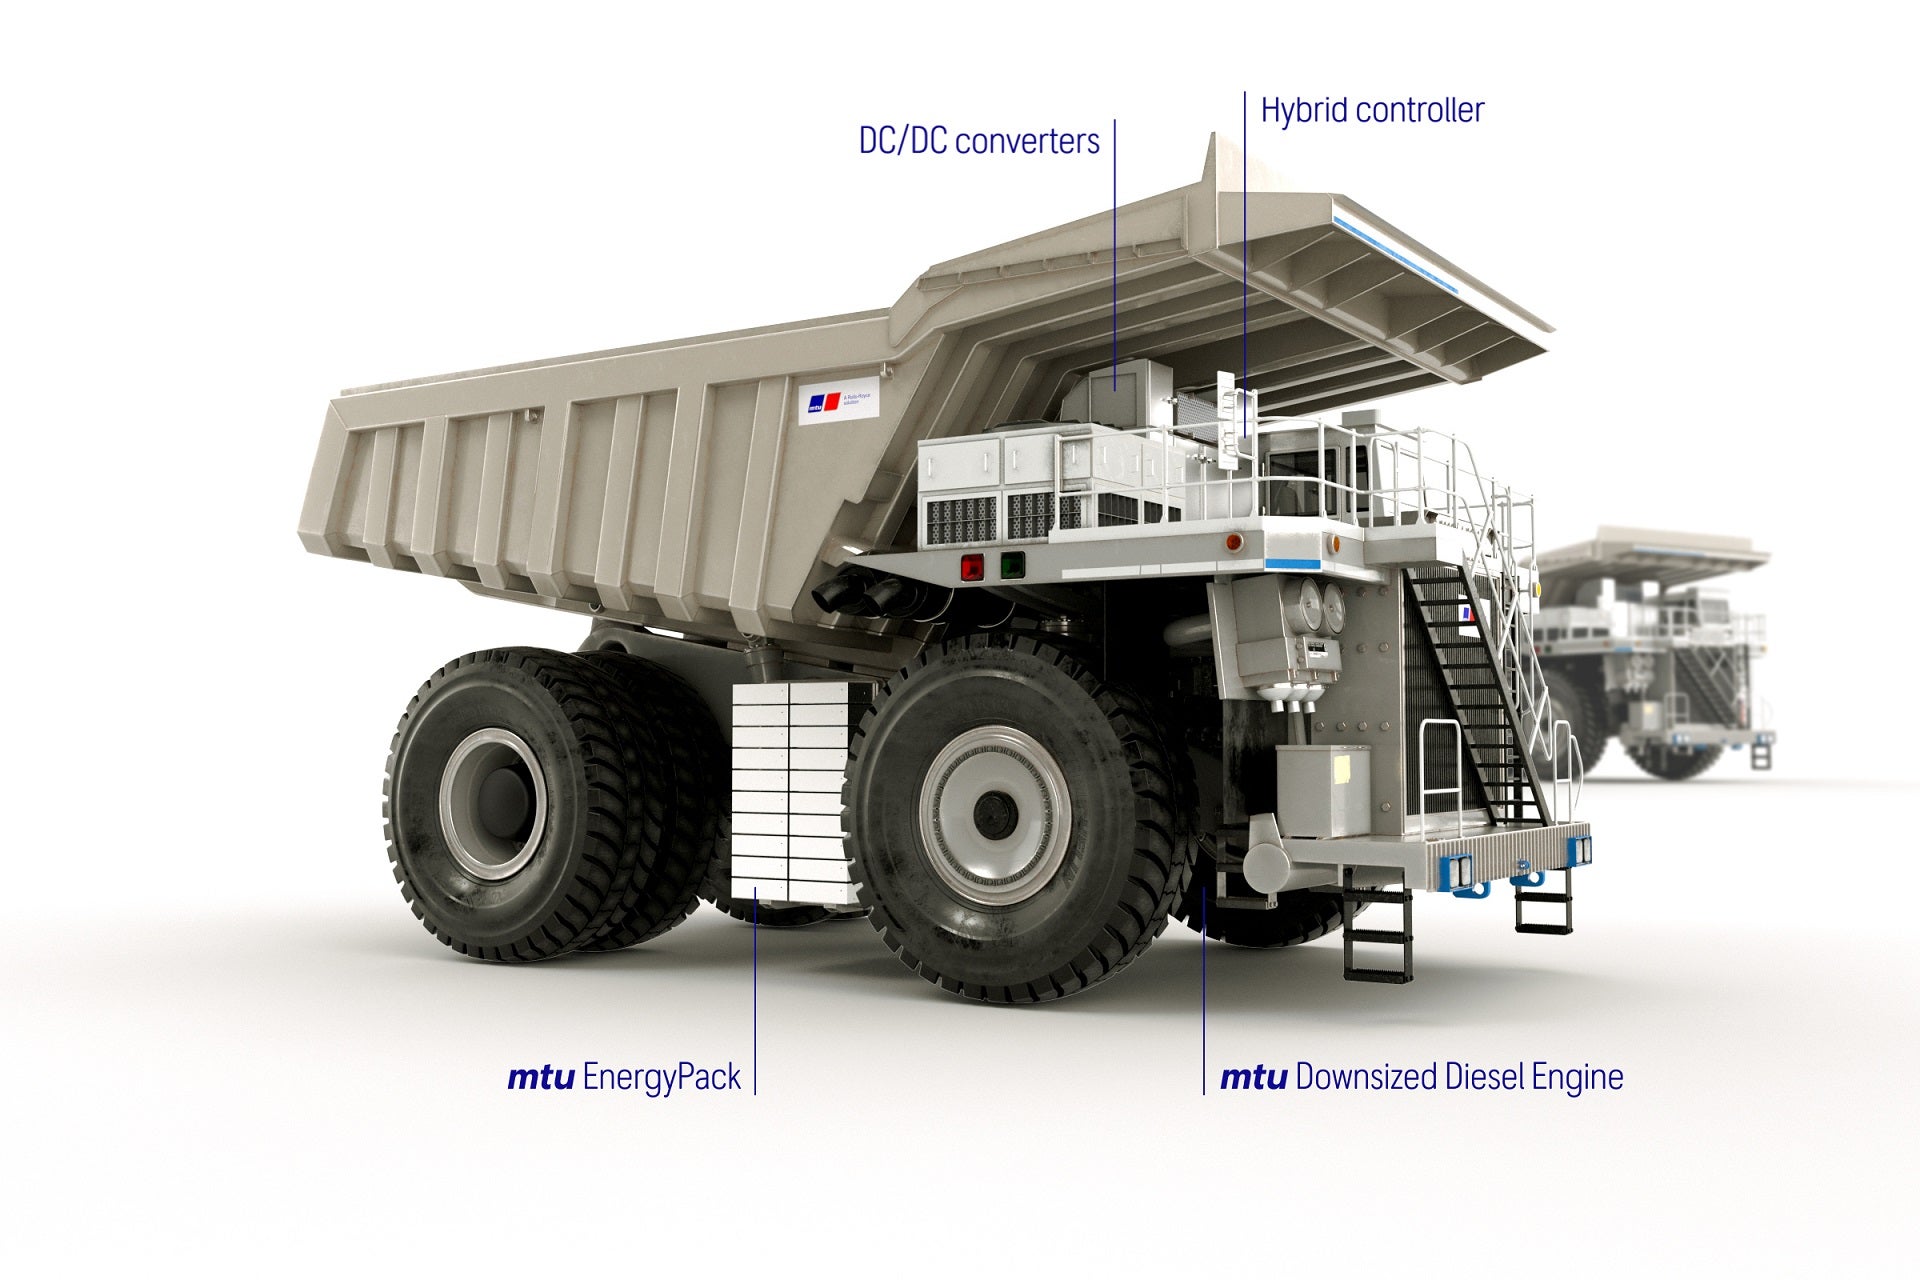 Rolls-Royce and Flanders partner on hybrid truck concept for green mining